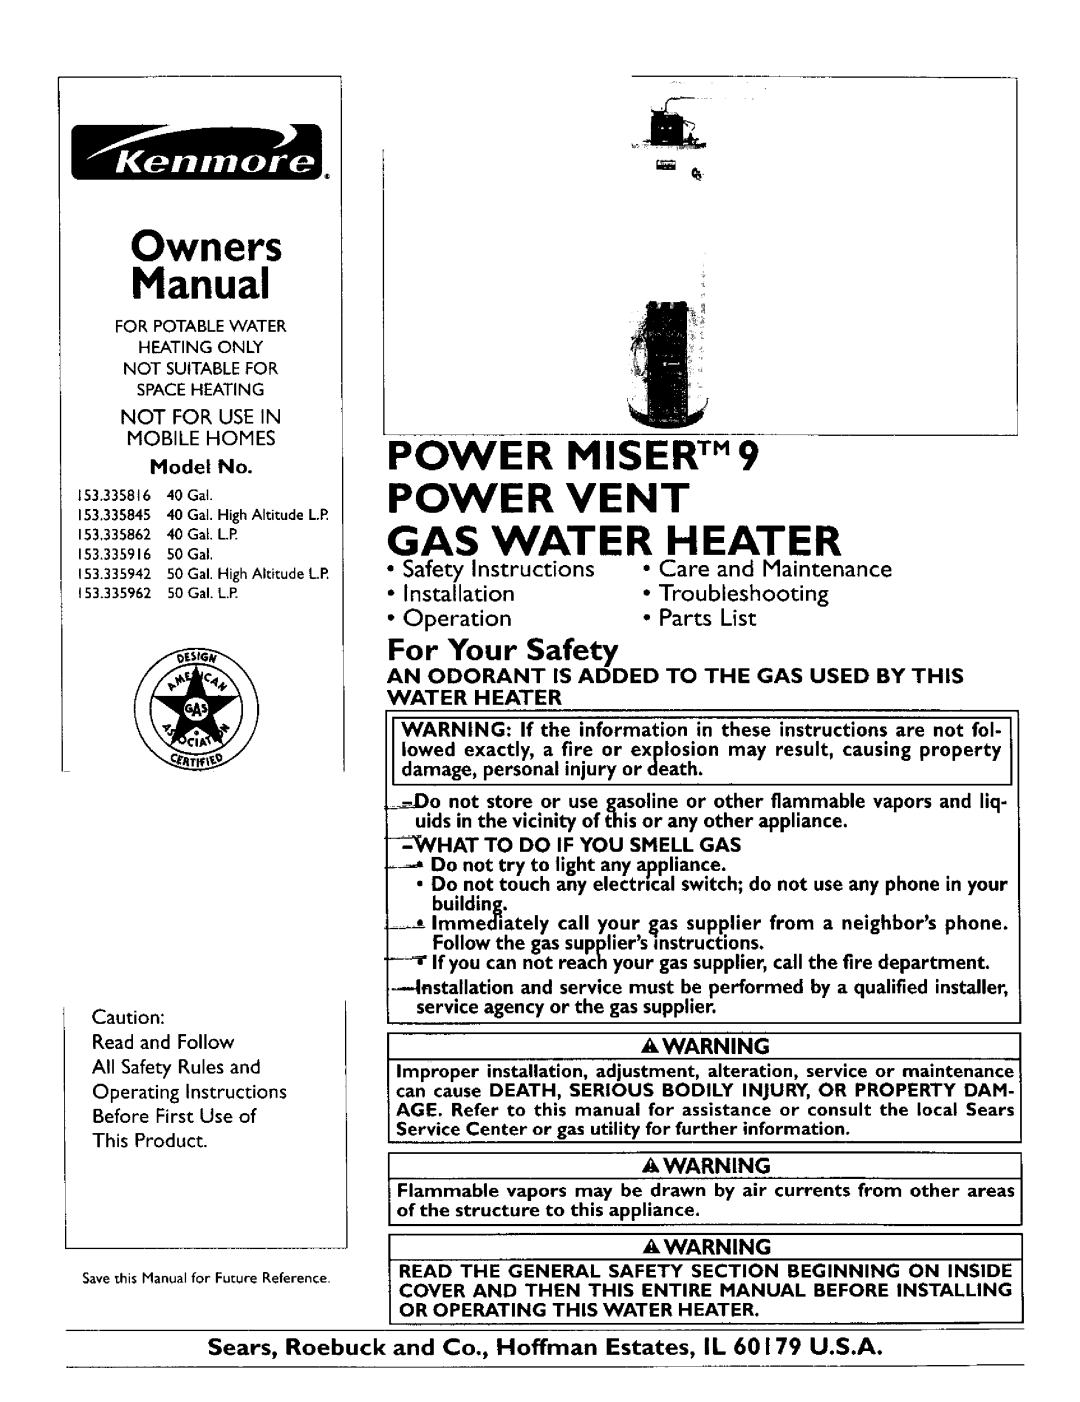 Kenmore 153.335942, L53.335816, 153.335845 owner manual For Your Safety, Power Vent Gas Water Heater, Power Miser Tm 